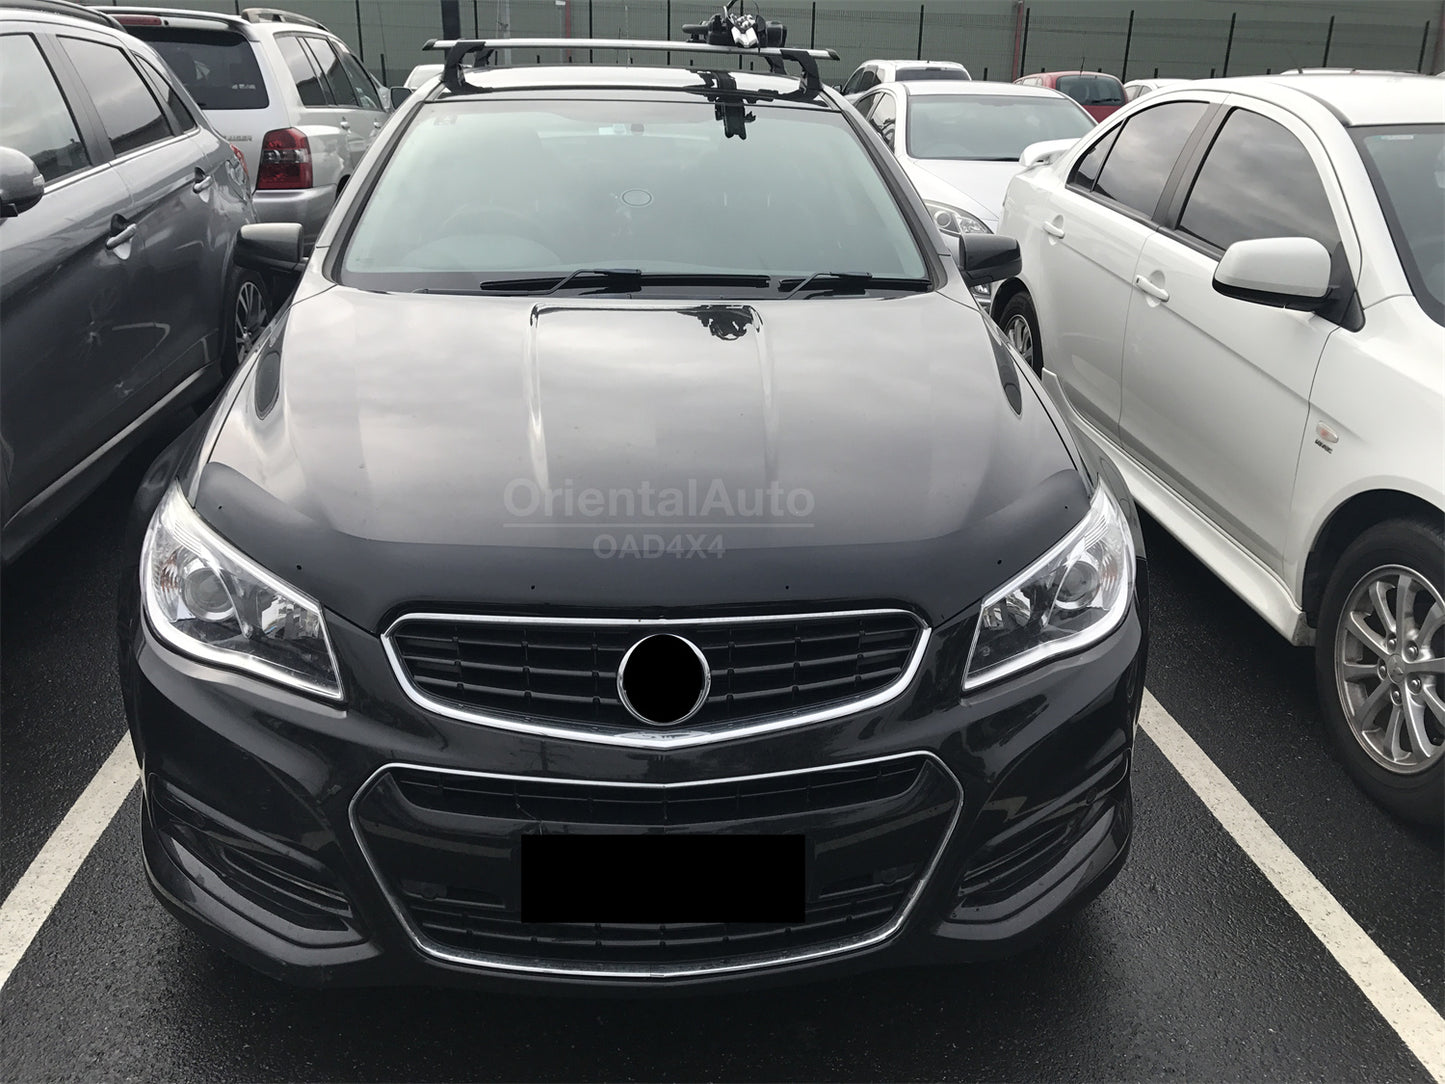 Bonnet Protector & Luxury 6pcs Weathershields Weather Shields Window Visor for Holden Commodore VF Wagon 2013-2016